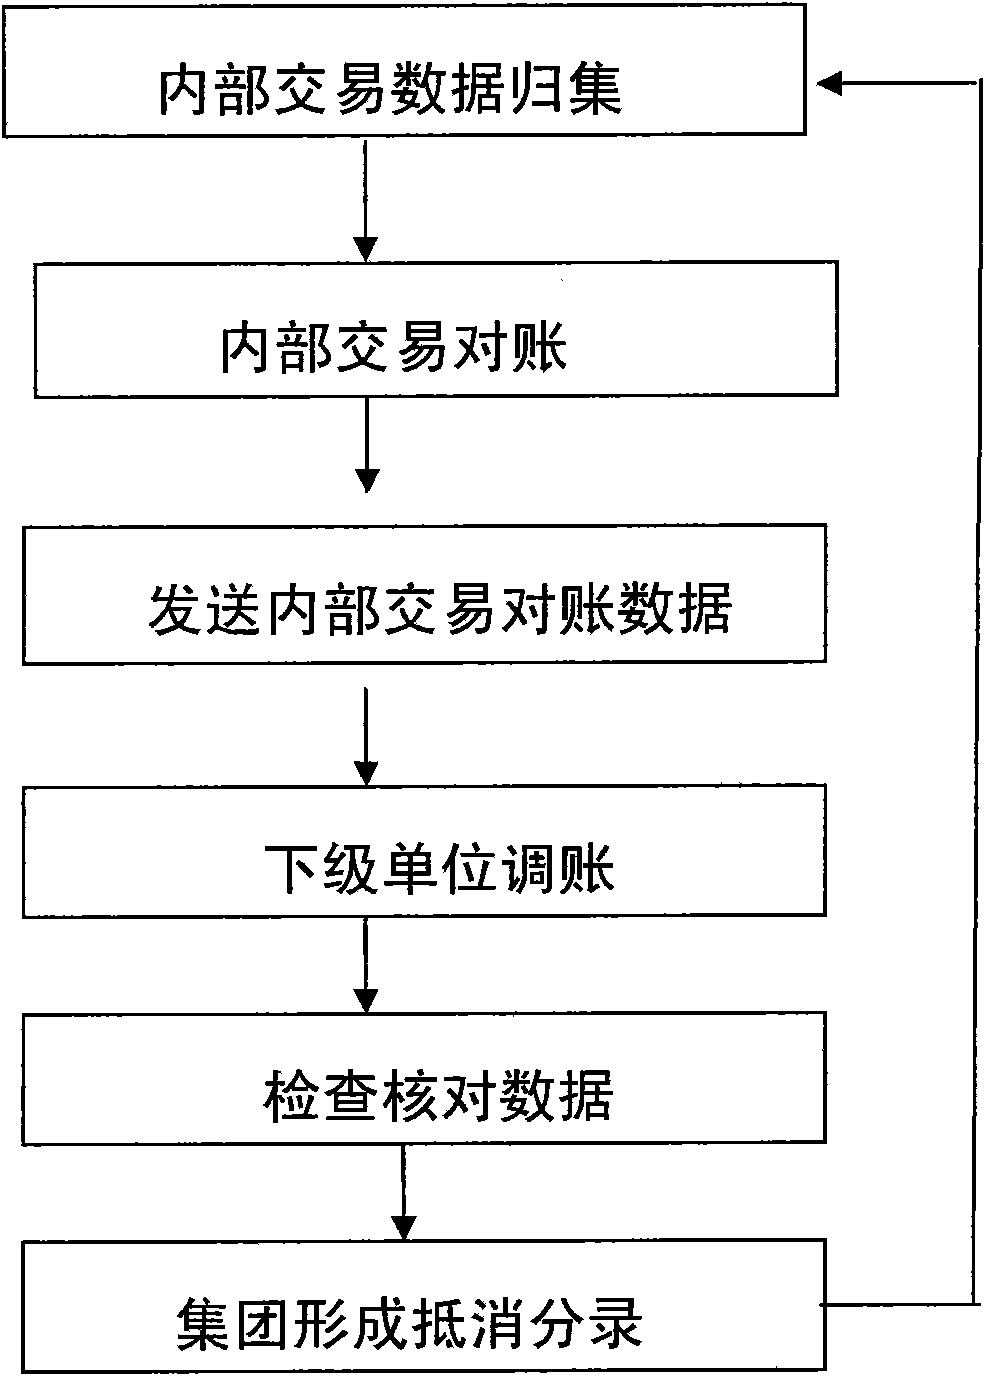 Method for reducing account in transit based on real time conformation of intratransaction